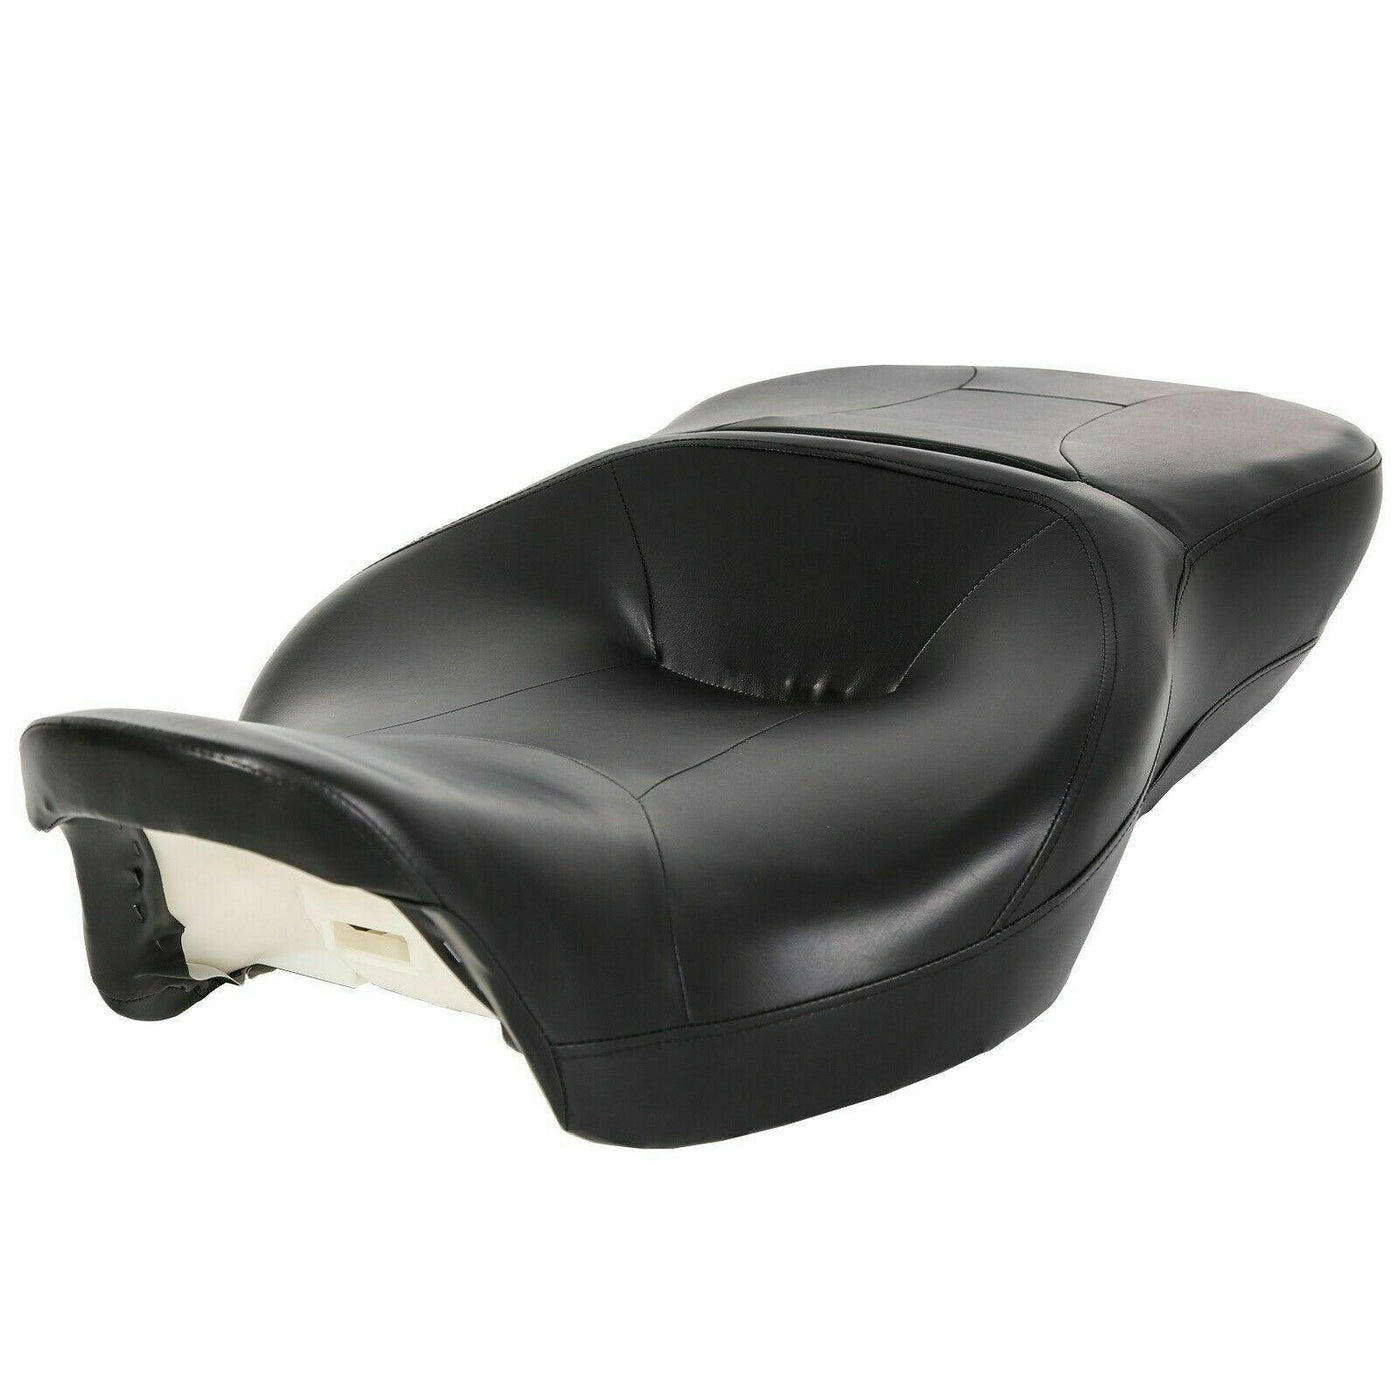 One-Piece Rider & Passenger Seat For Harley 2009-2021 Touring FLHT FLHX FLHR - Moto Life Products